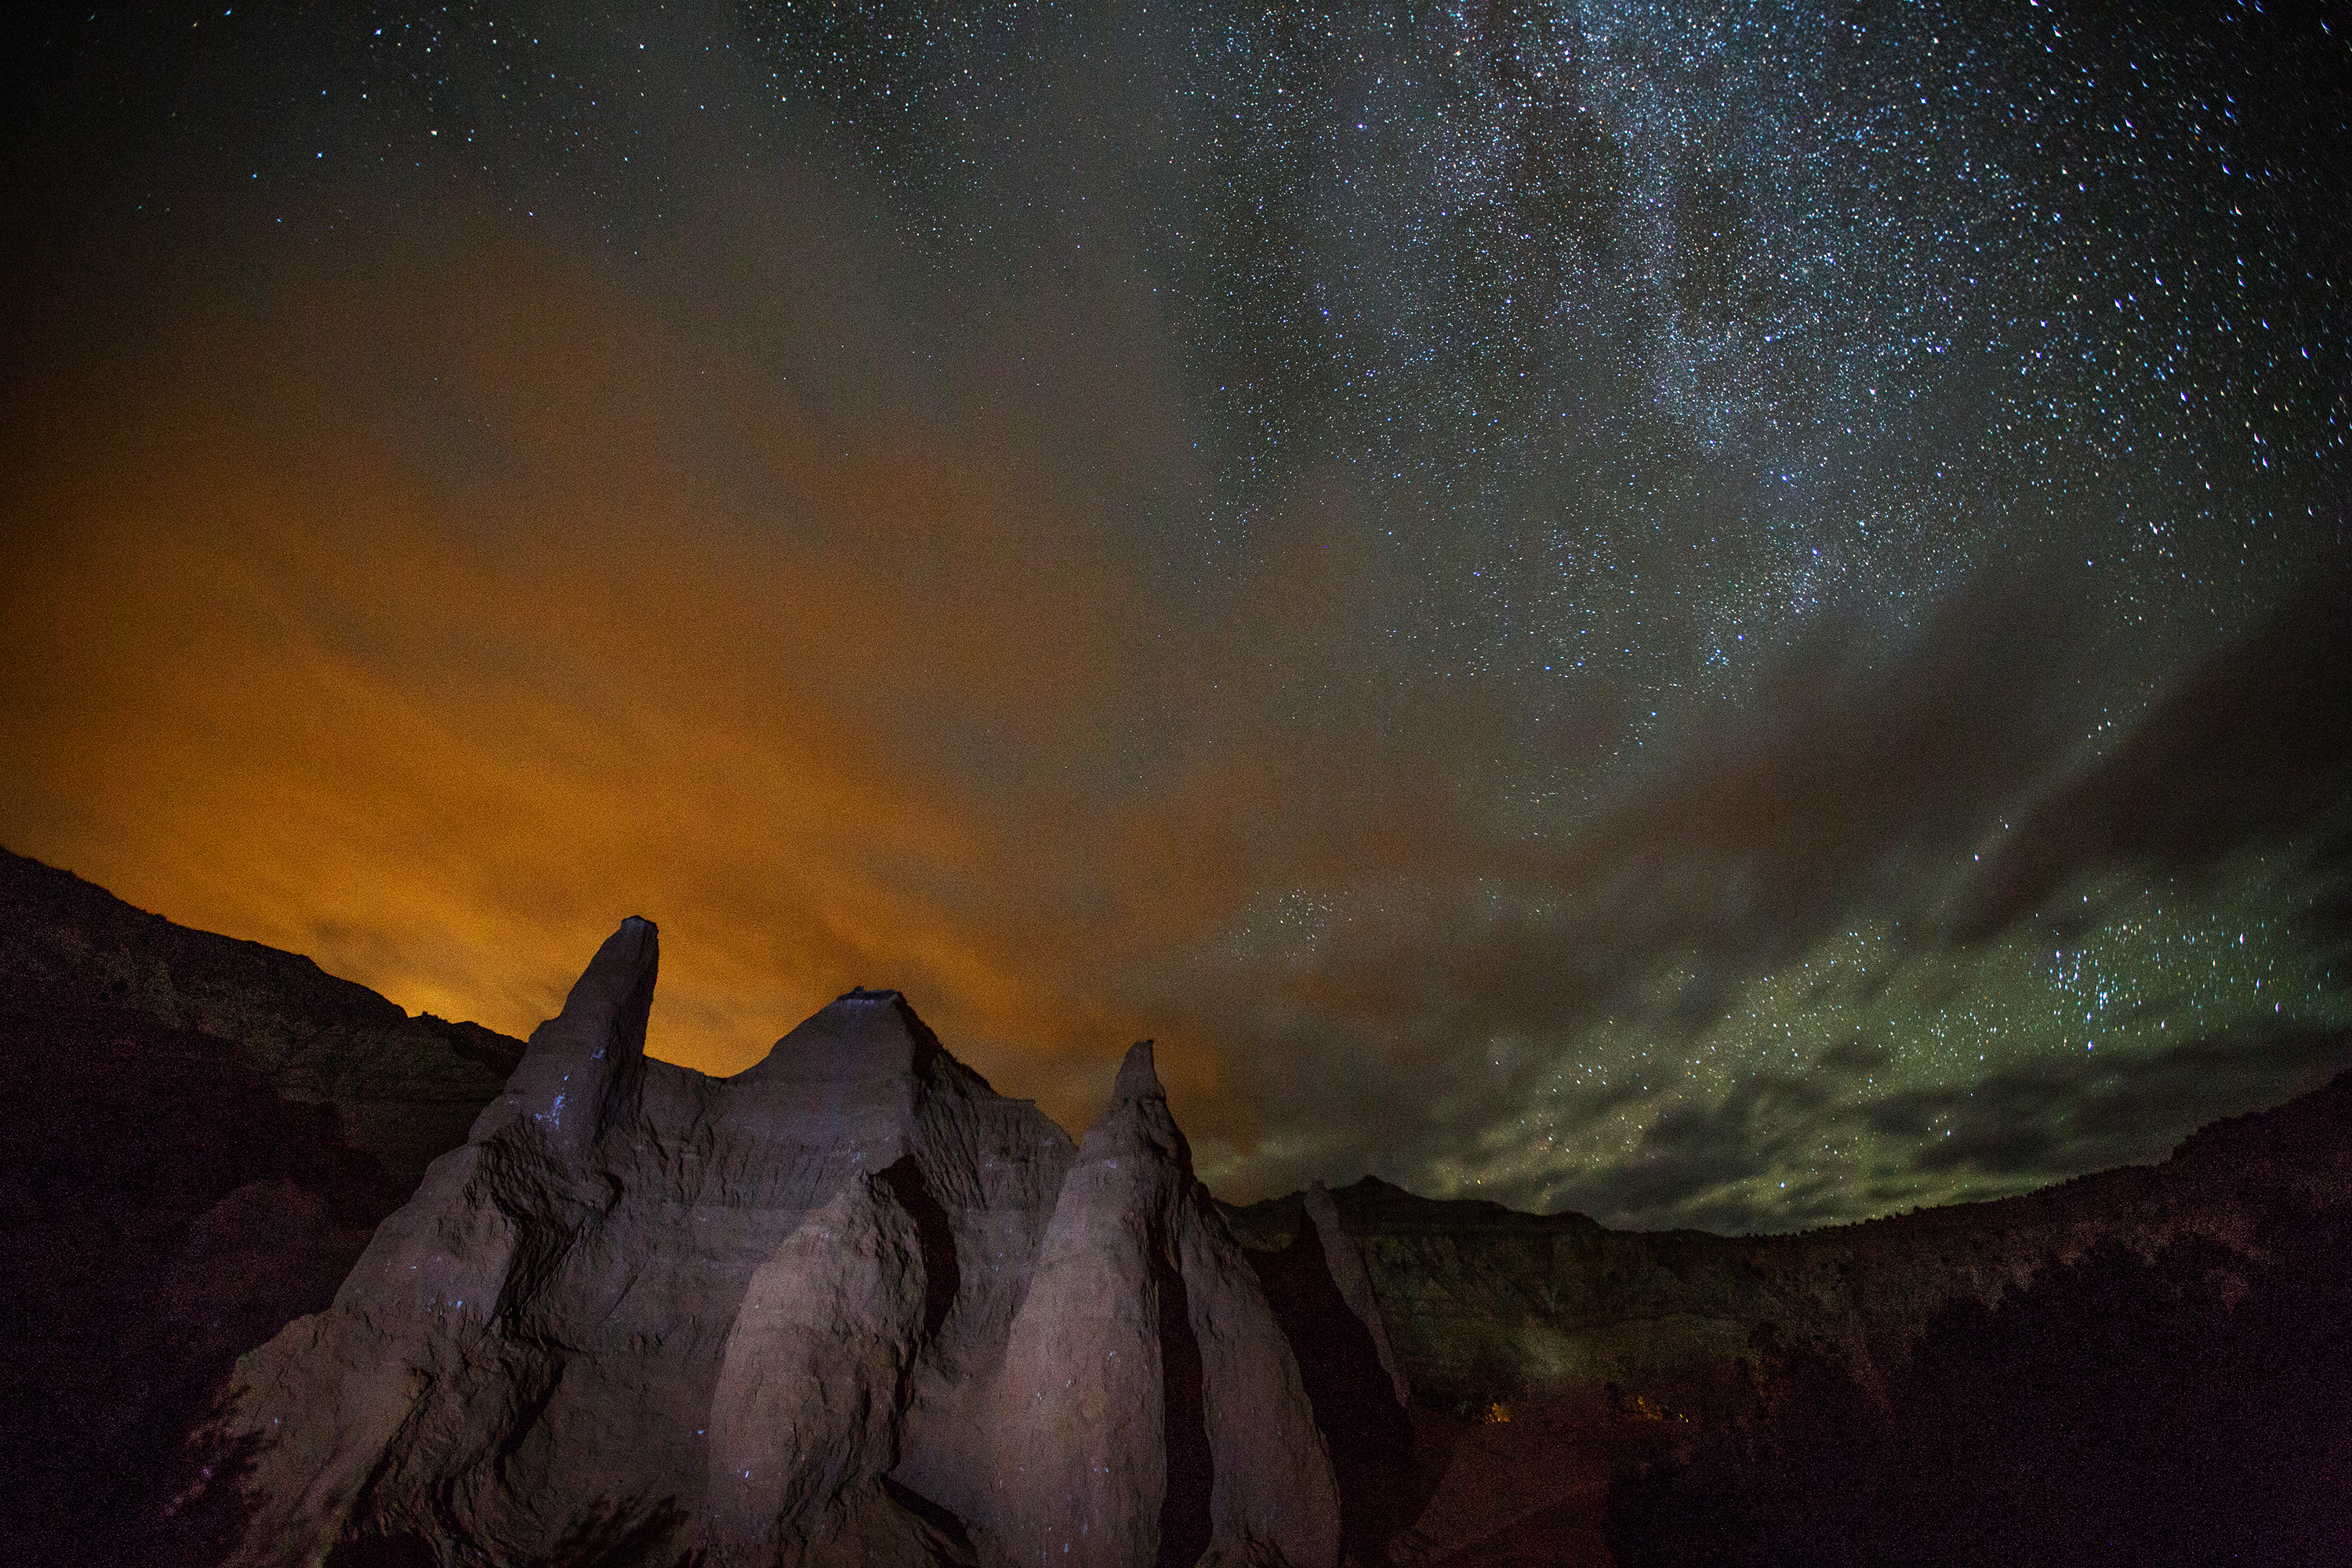 partly cloudy sky with stars on the right side of the image and a rock formation in the foreground.